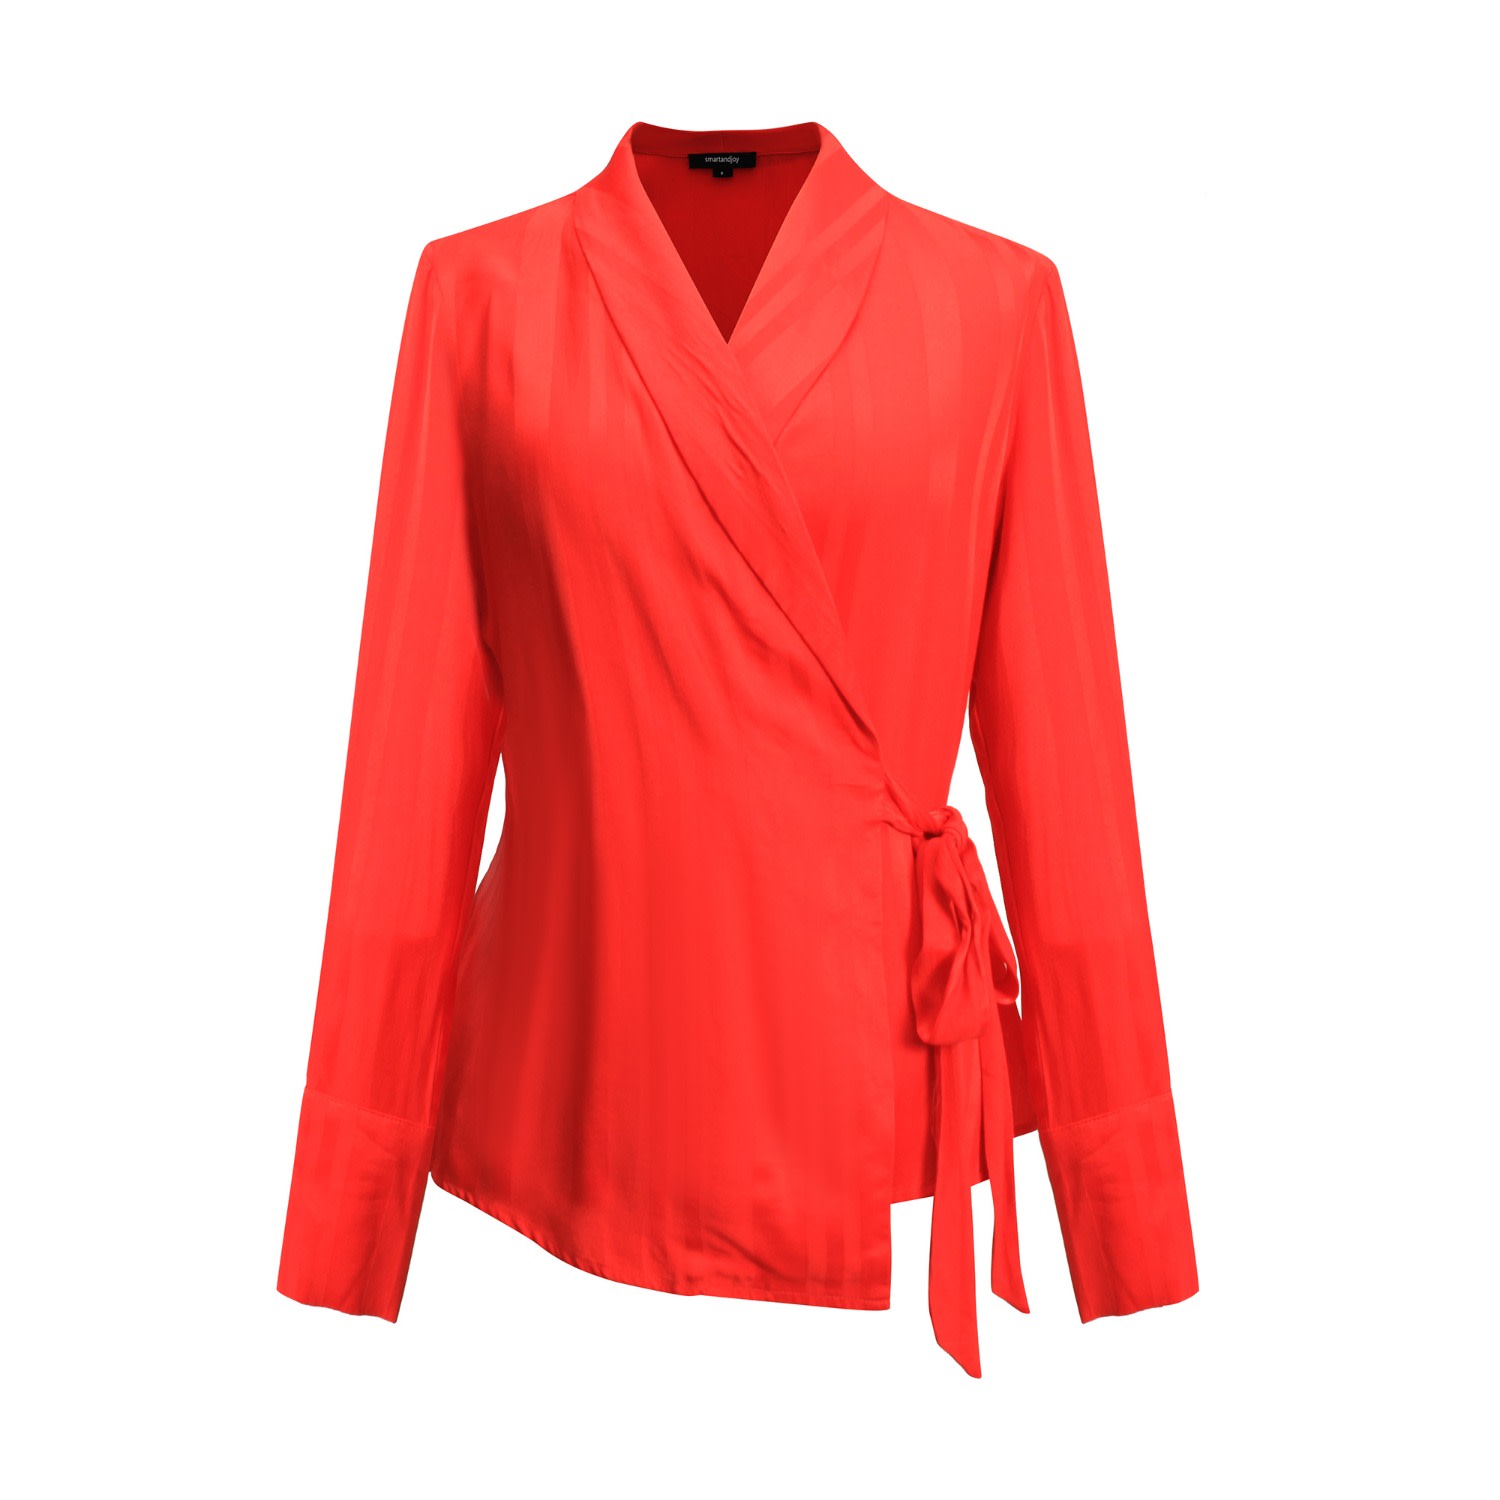 Women’s Warp Long Sleeves Blouse - Red Small Smart and Joy